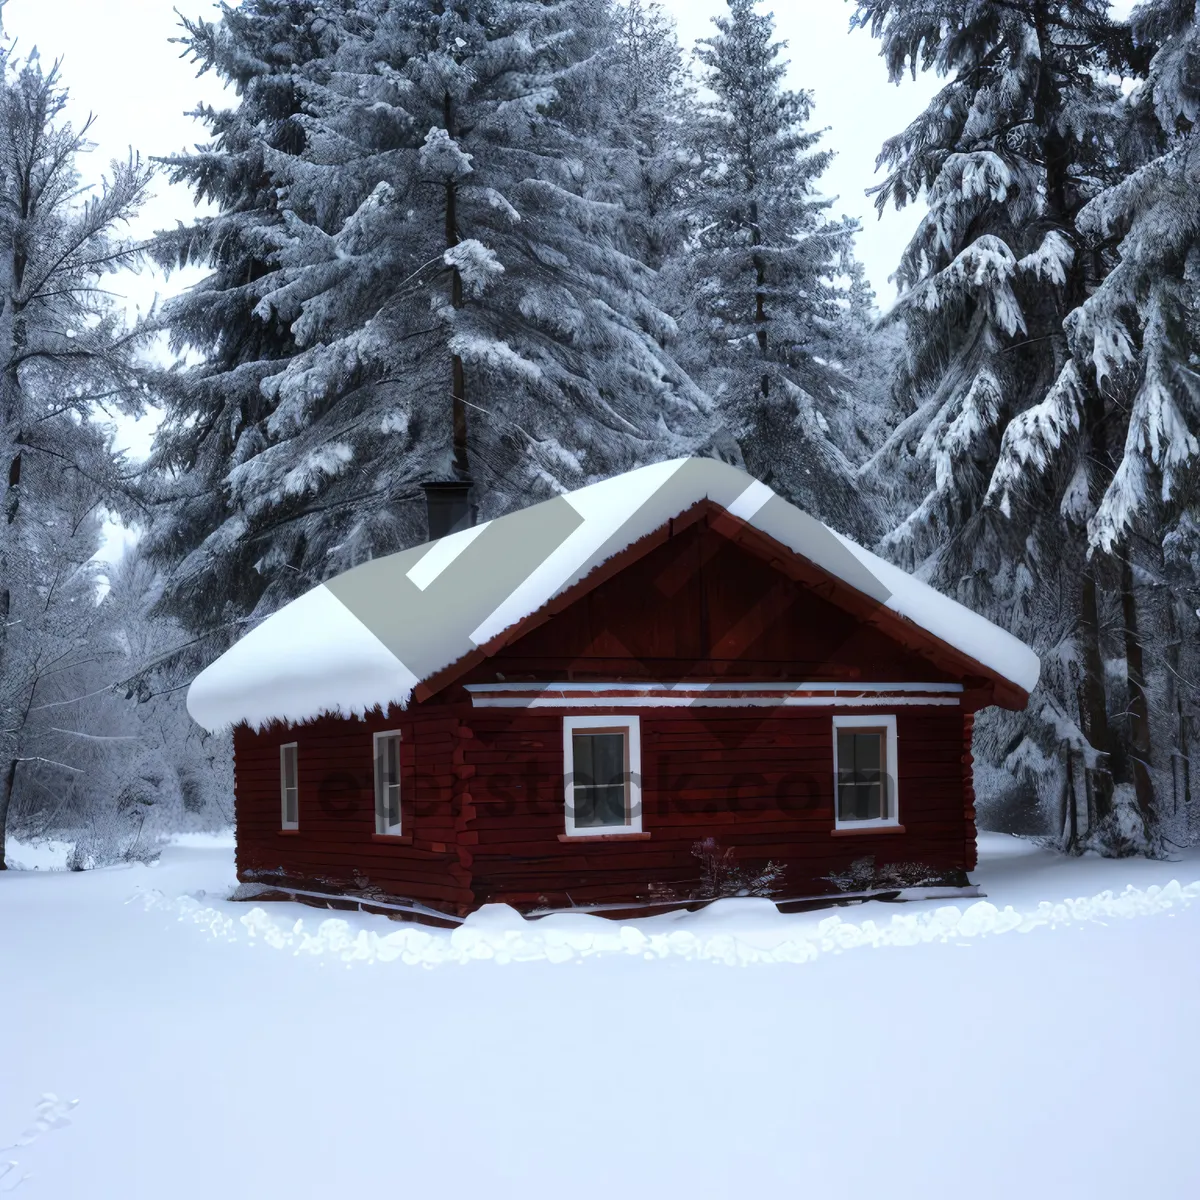 Picture of Snowy Mountain Barn in Winter Wonderland